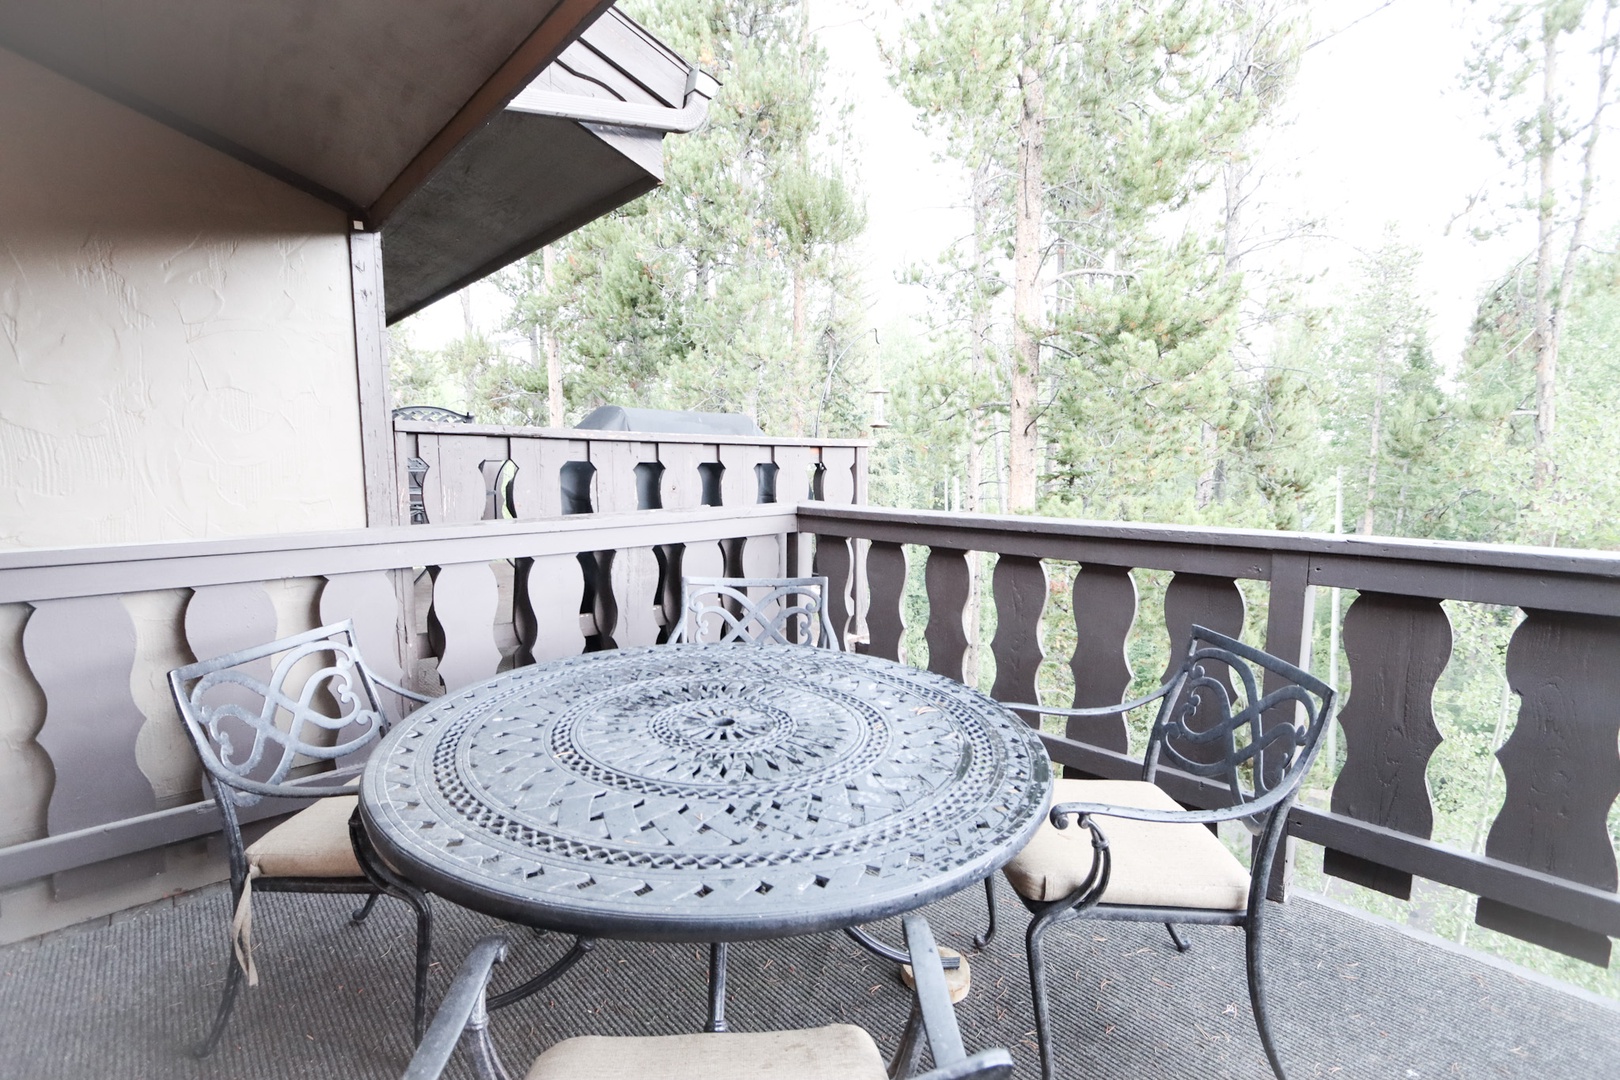 Dine al fresco or relax on the balcony while you grill up a feast!